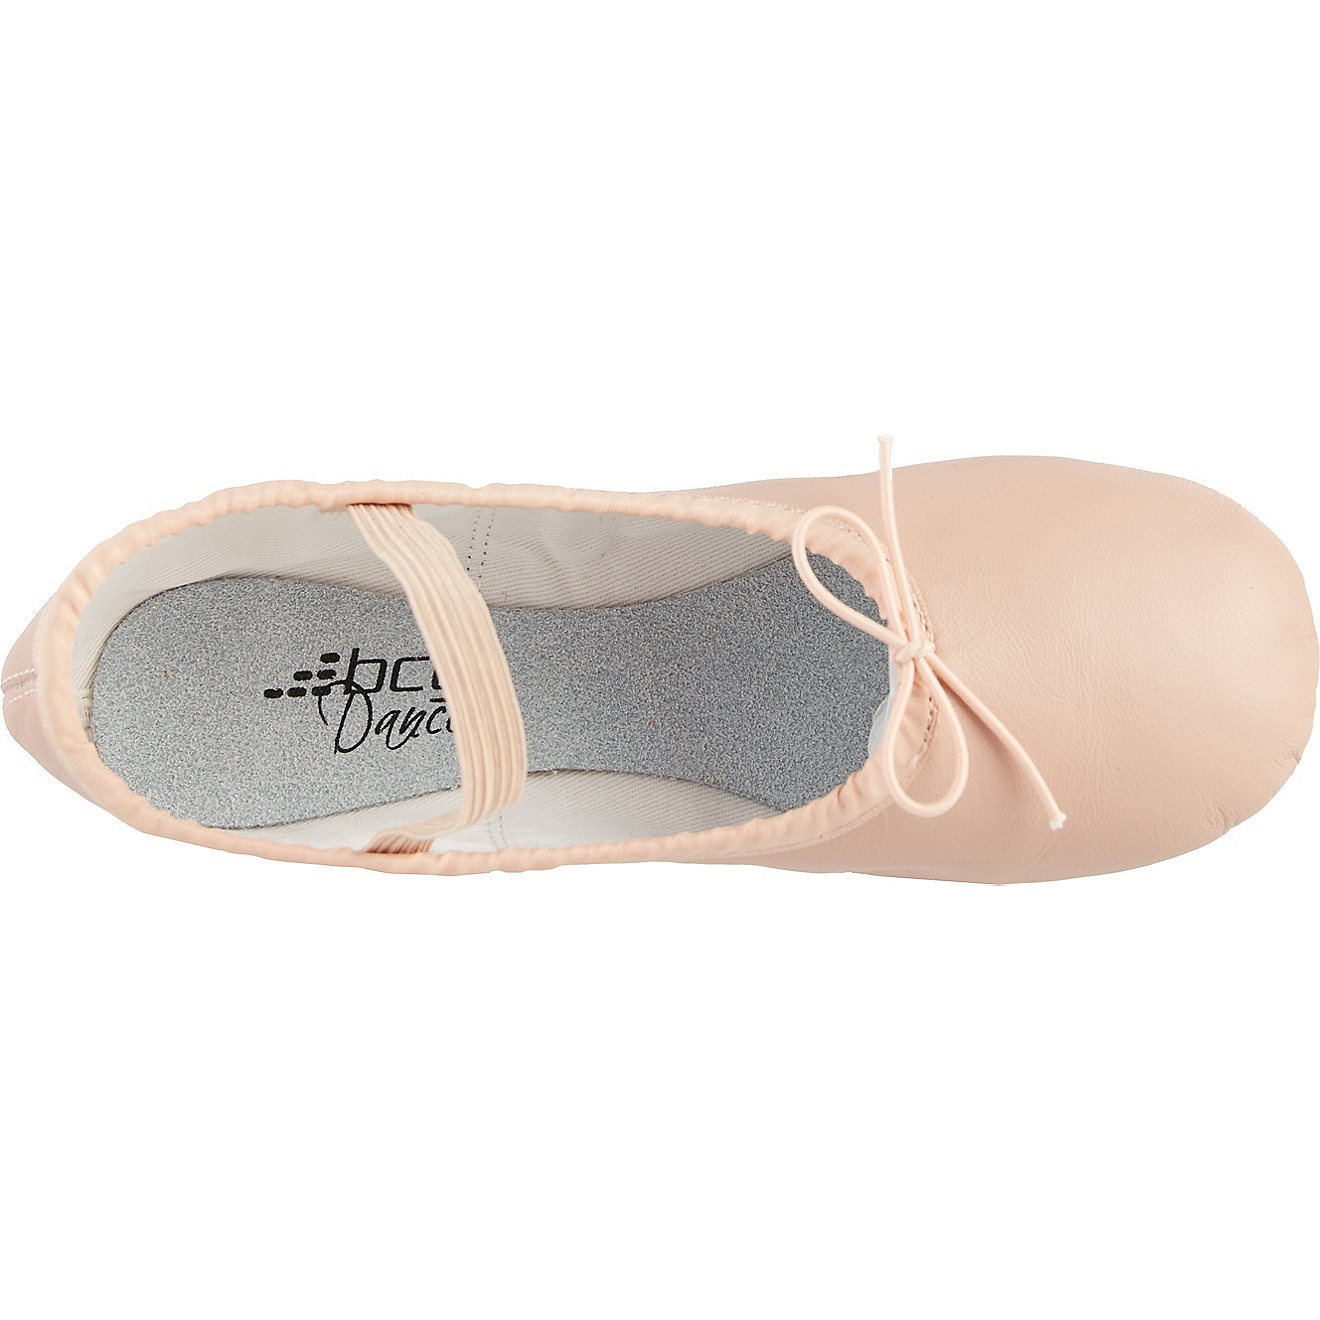 BCG Girls' Ballet Dance Shoes                                                                                                    - view number 3